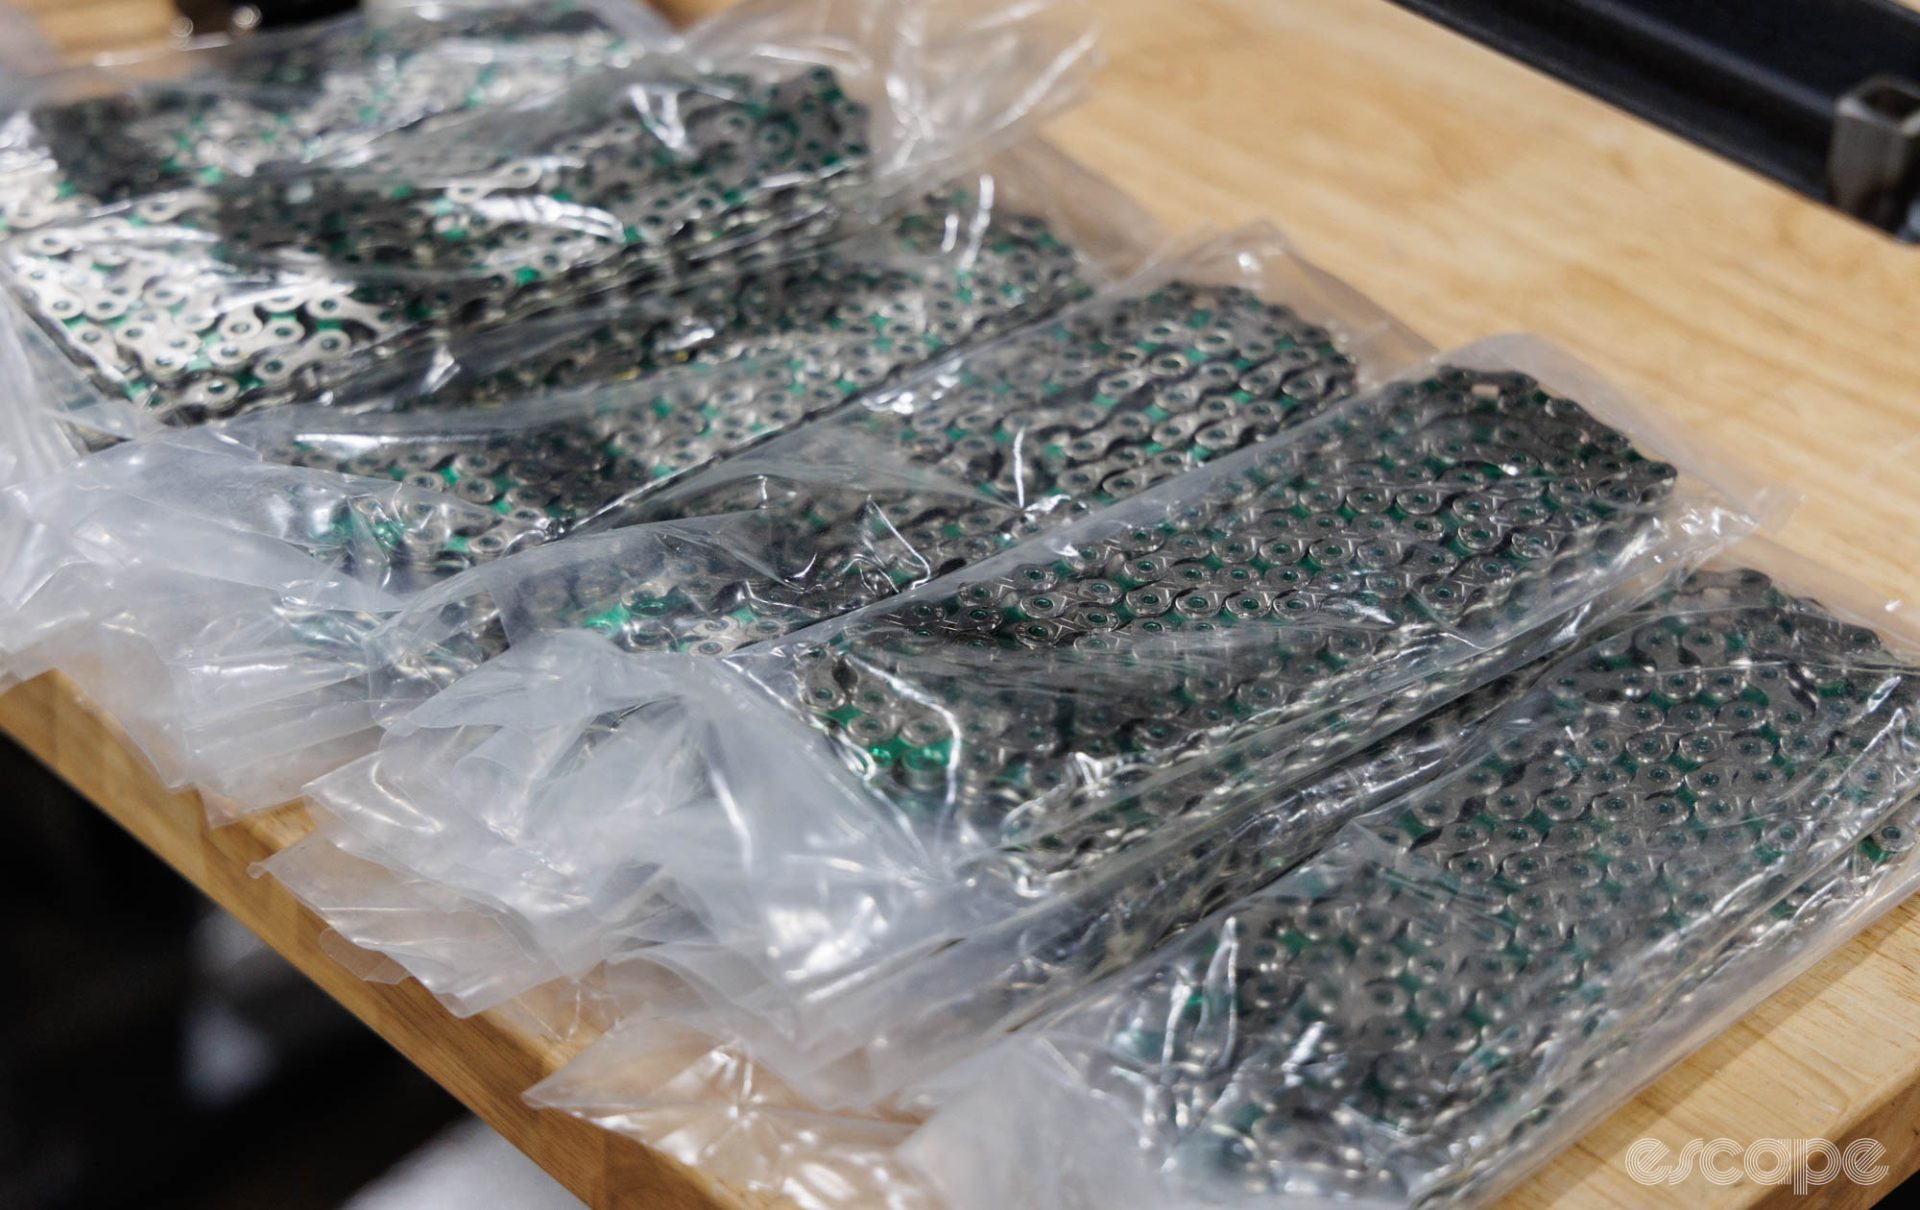 Stacks of KMC chains sit in plastic bags on a bench. The inner links are Abbey's green color.